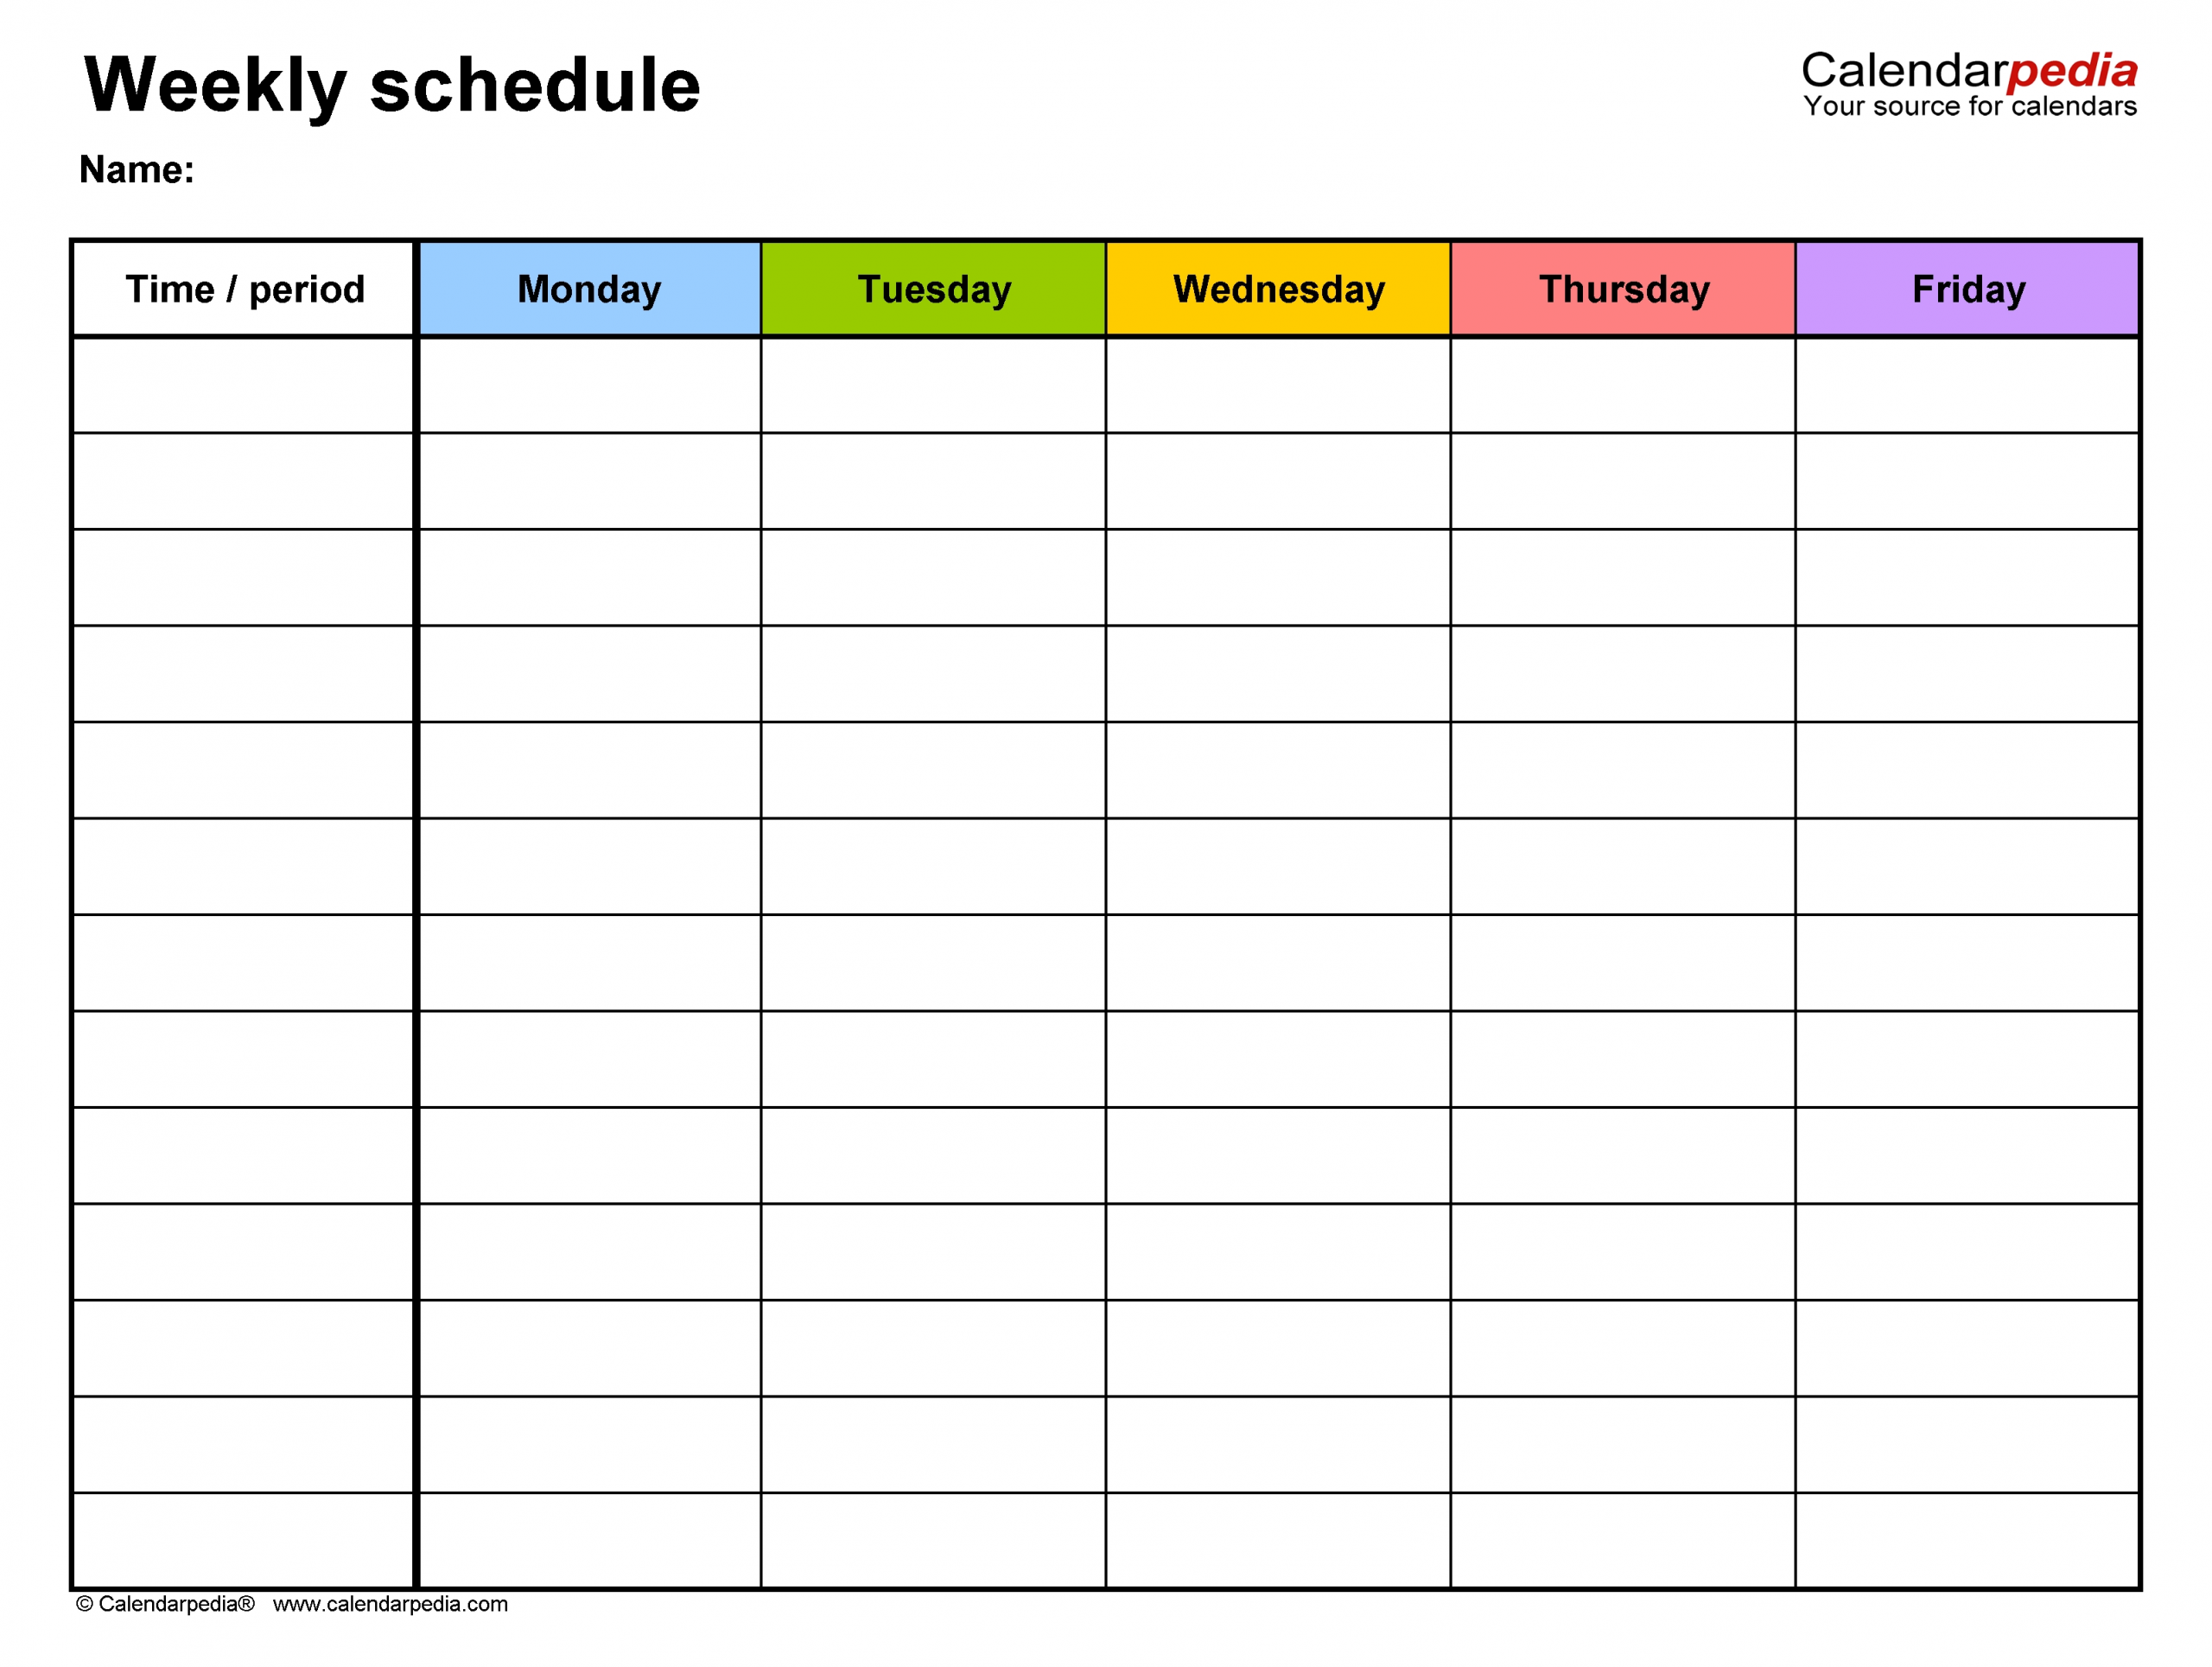 Free Weekly Schedule Templates For Excel - 18 Templates 5 Day Calendar Template Excel